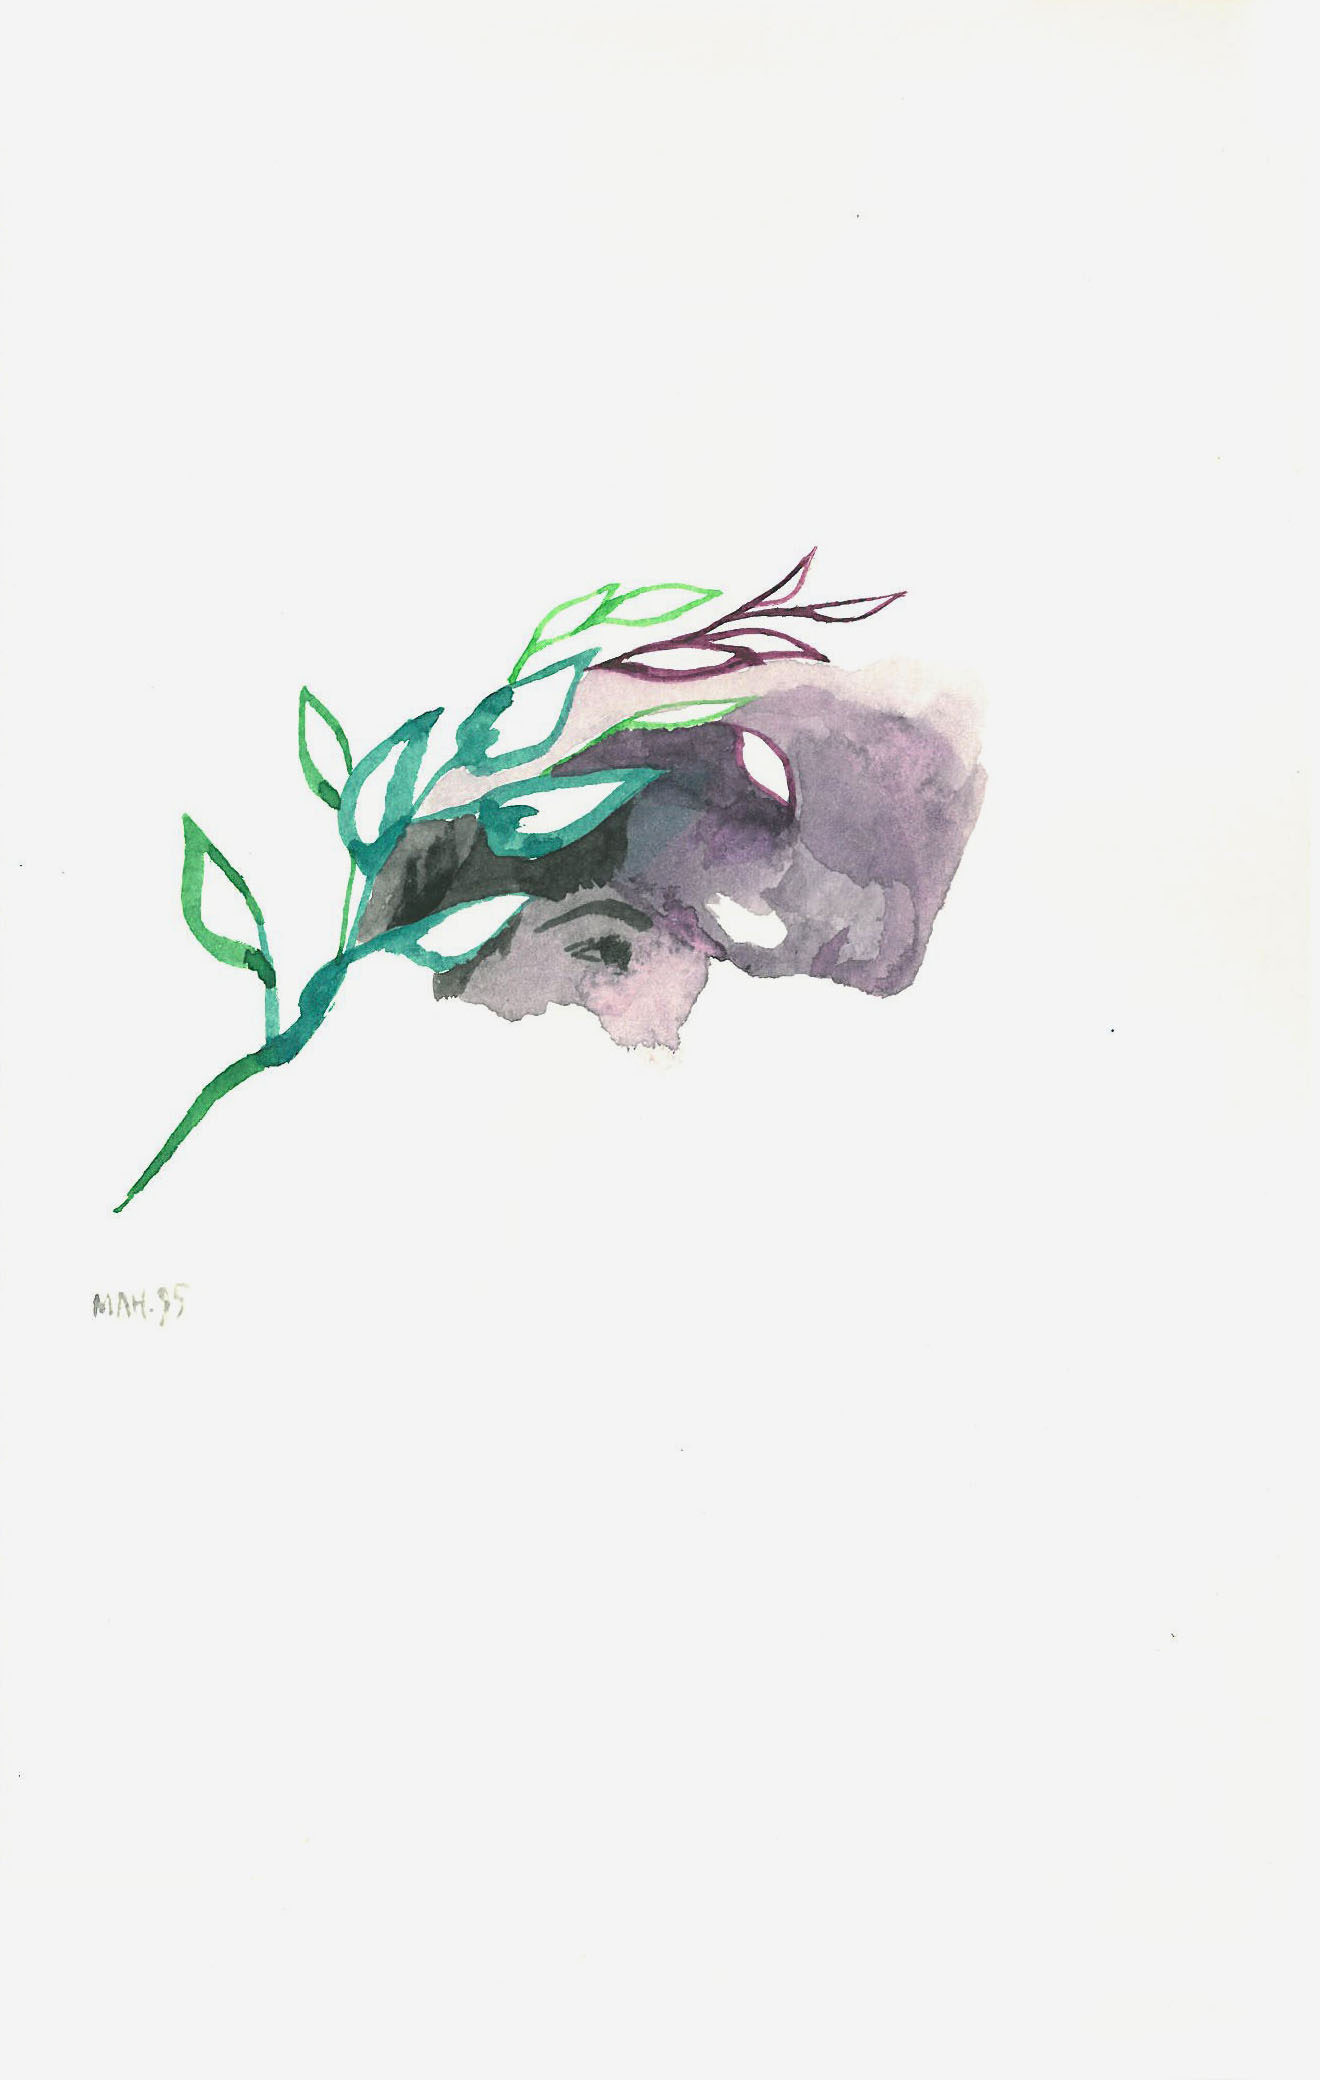 Untitled, 2016, Watercolor on paper, 11.5 x 18 cm